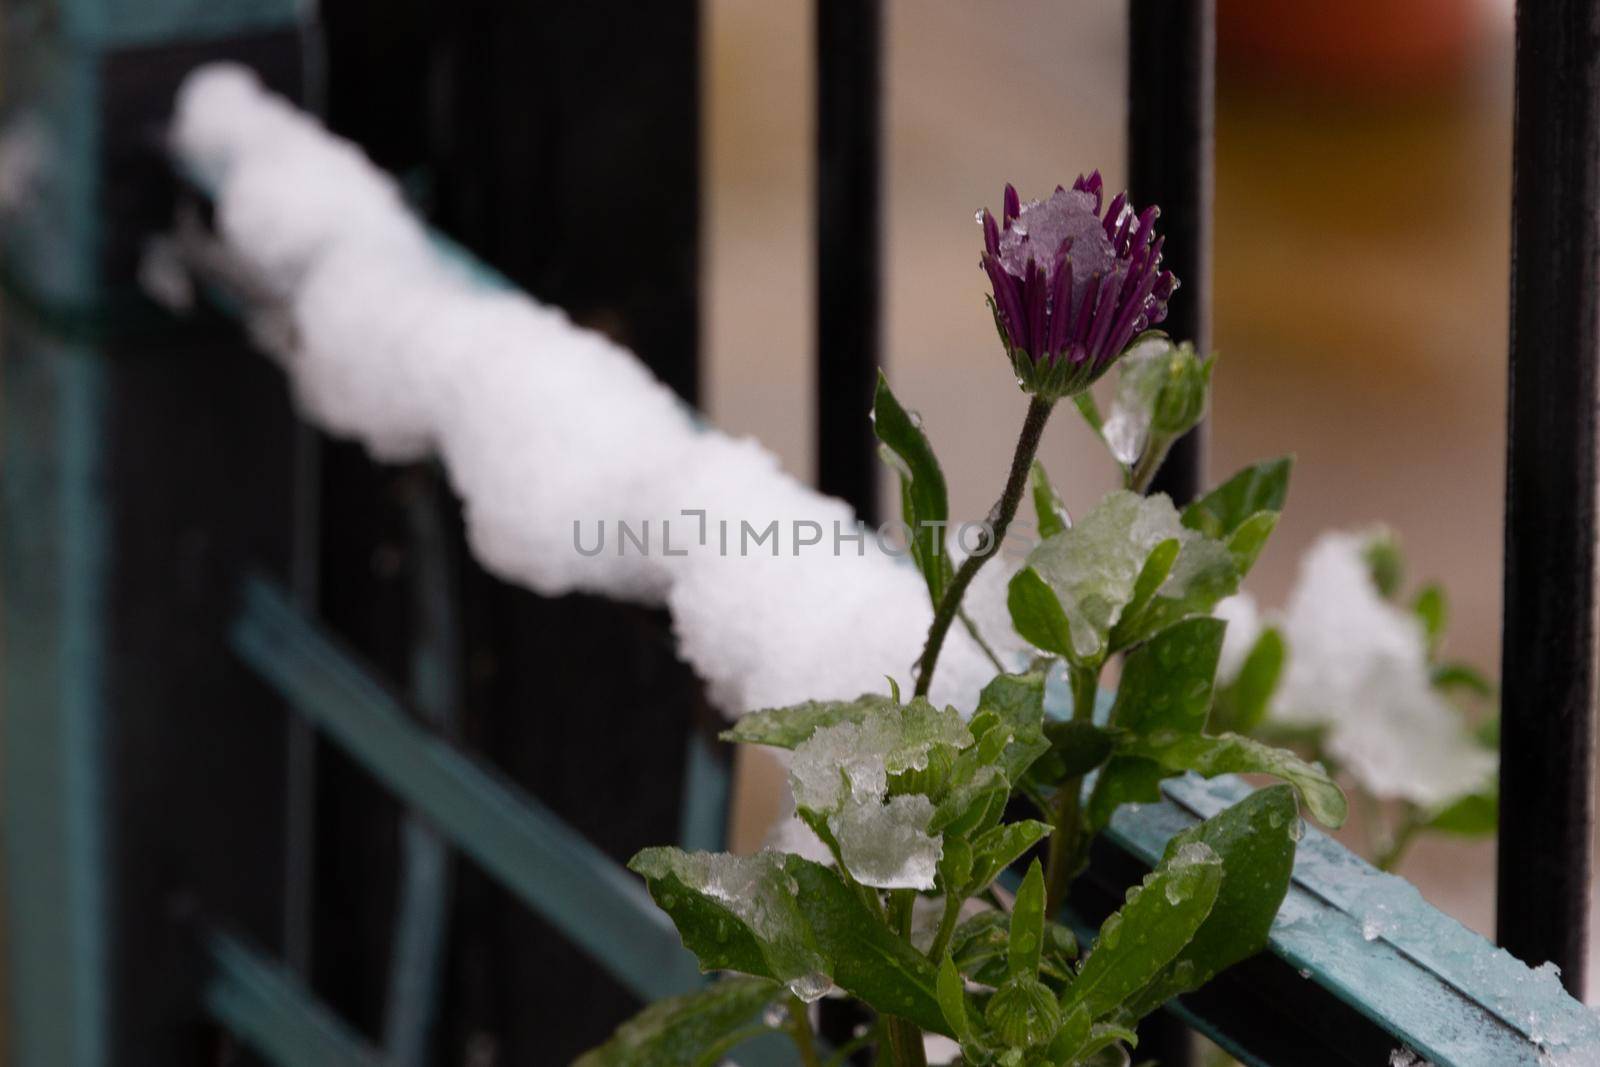 Deatil of a purple flower by a green fence in a snow day